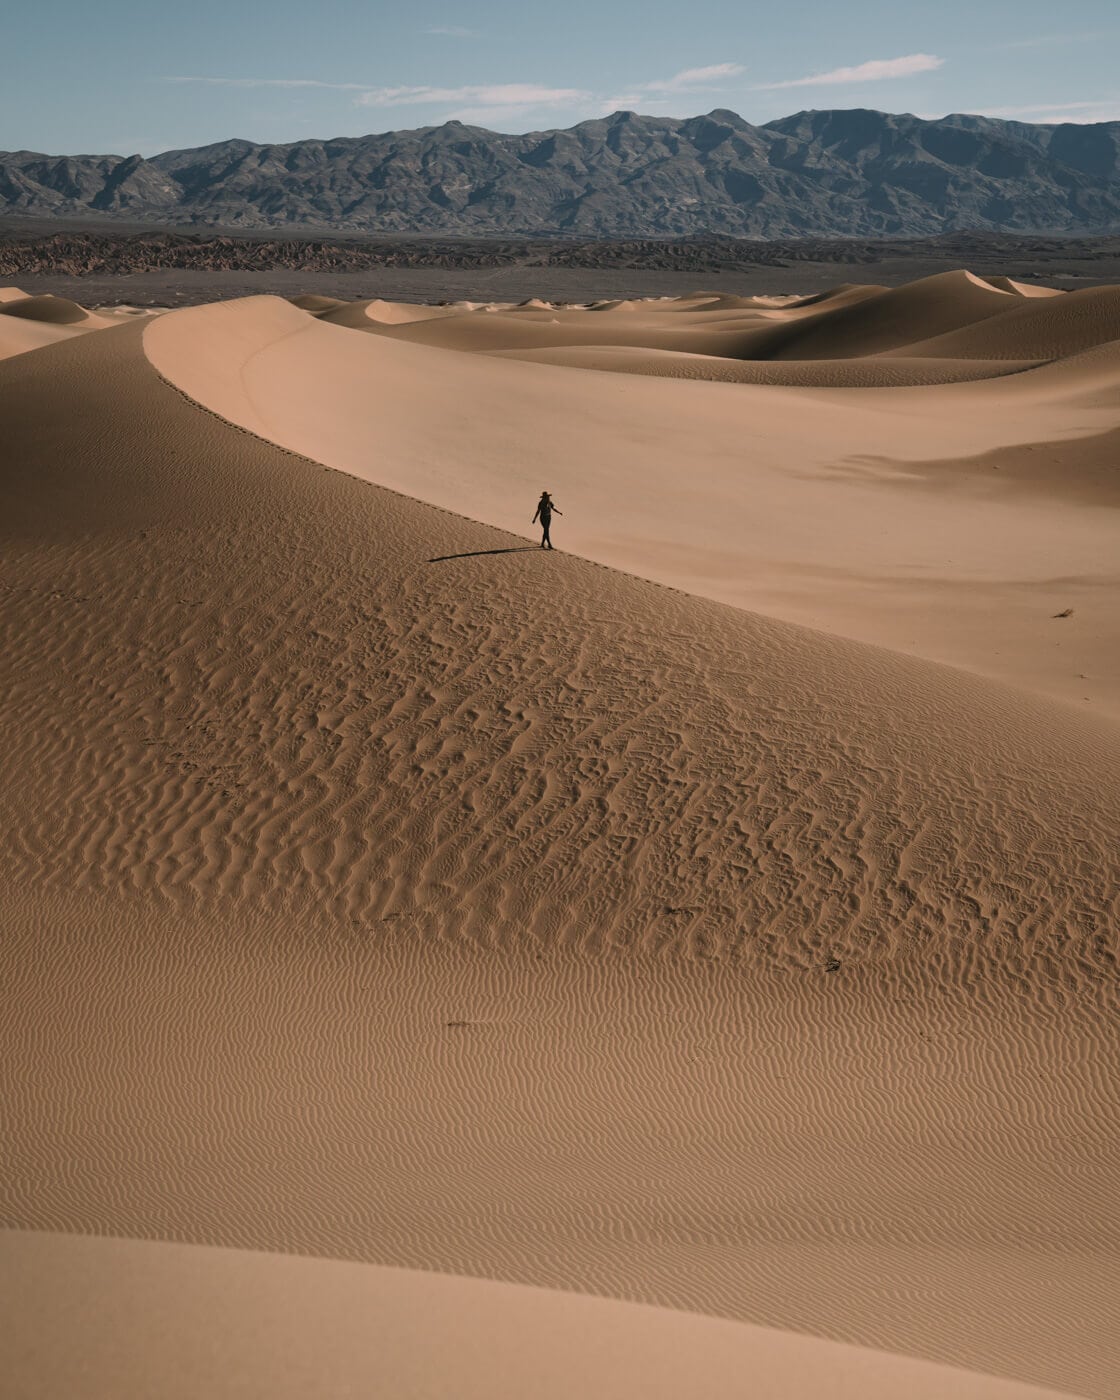 Small person walking the sand dunes in Death Valley